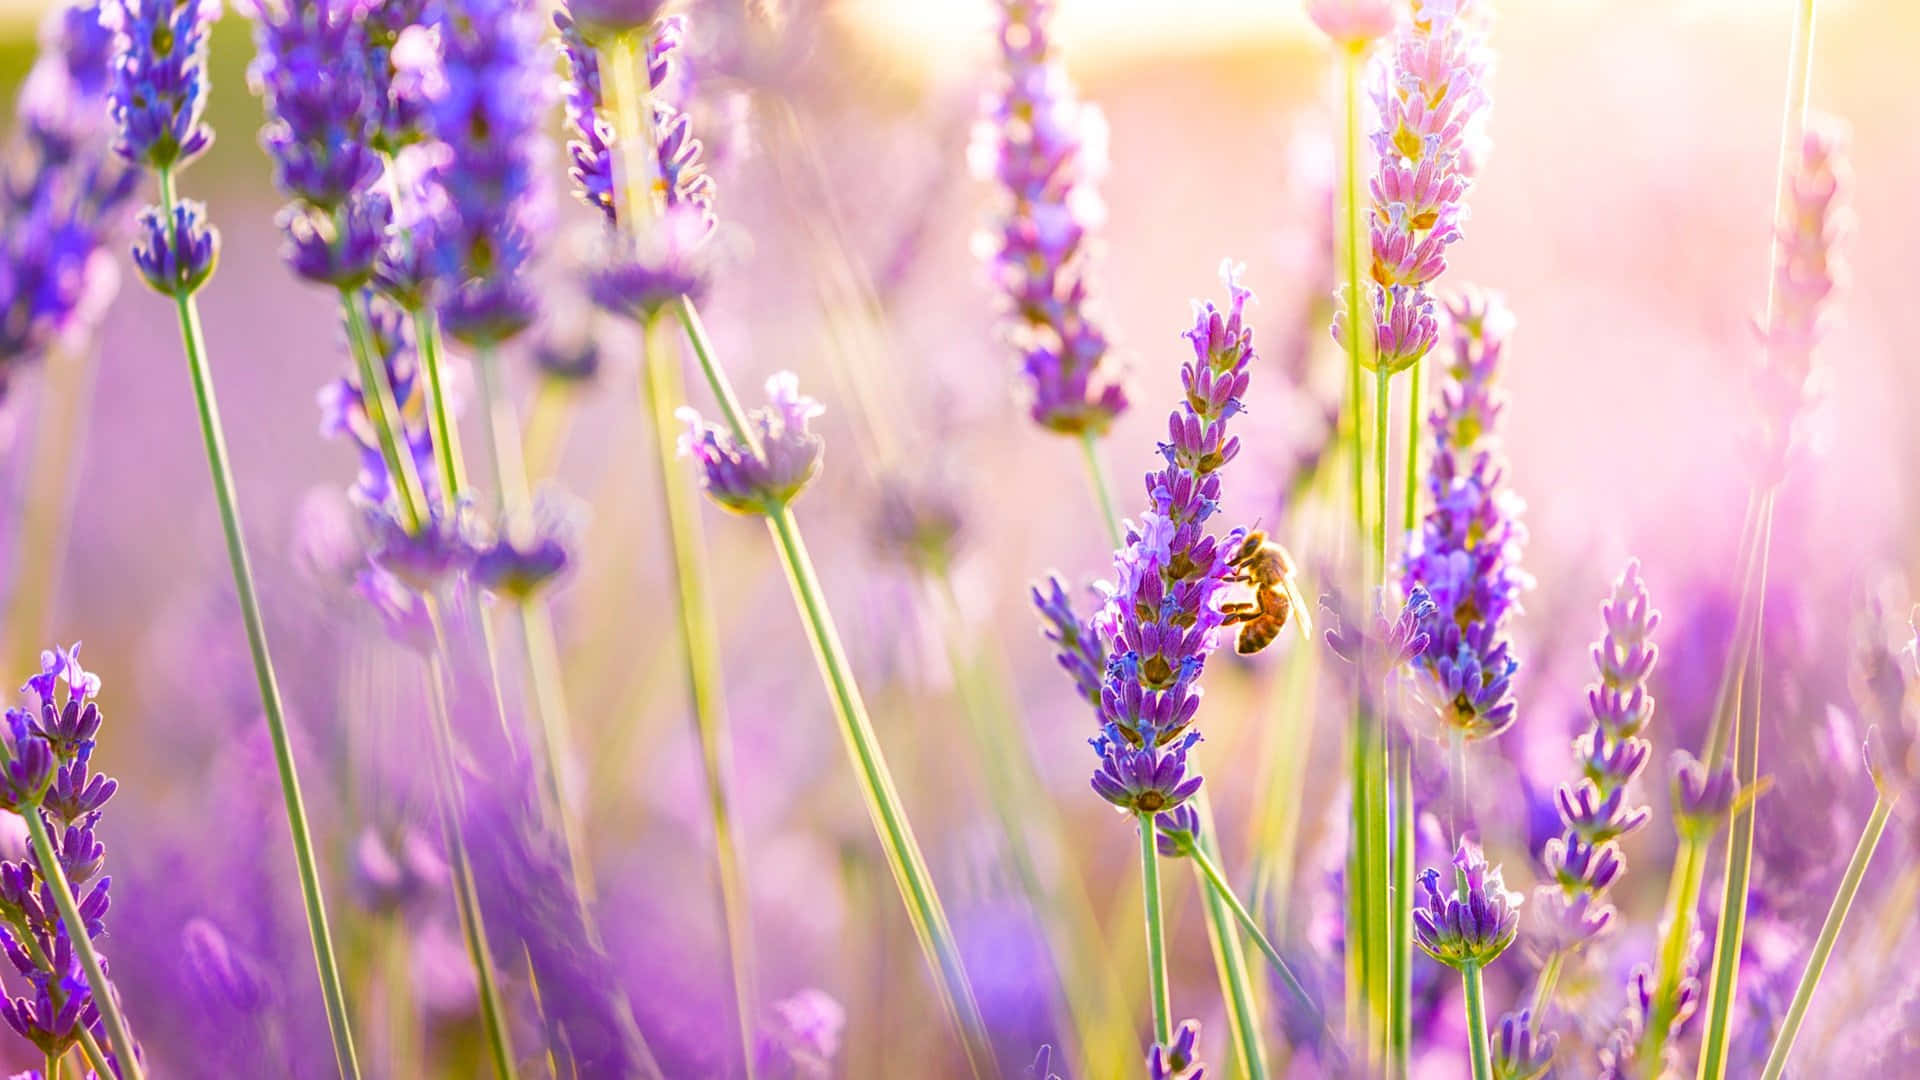 Fully Bloomed Lavender Flowers Field Close-Up Wallpaper